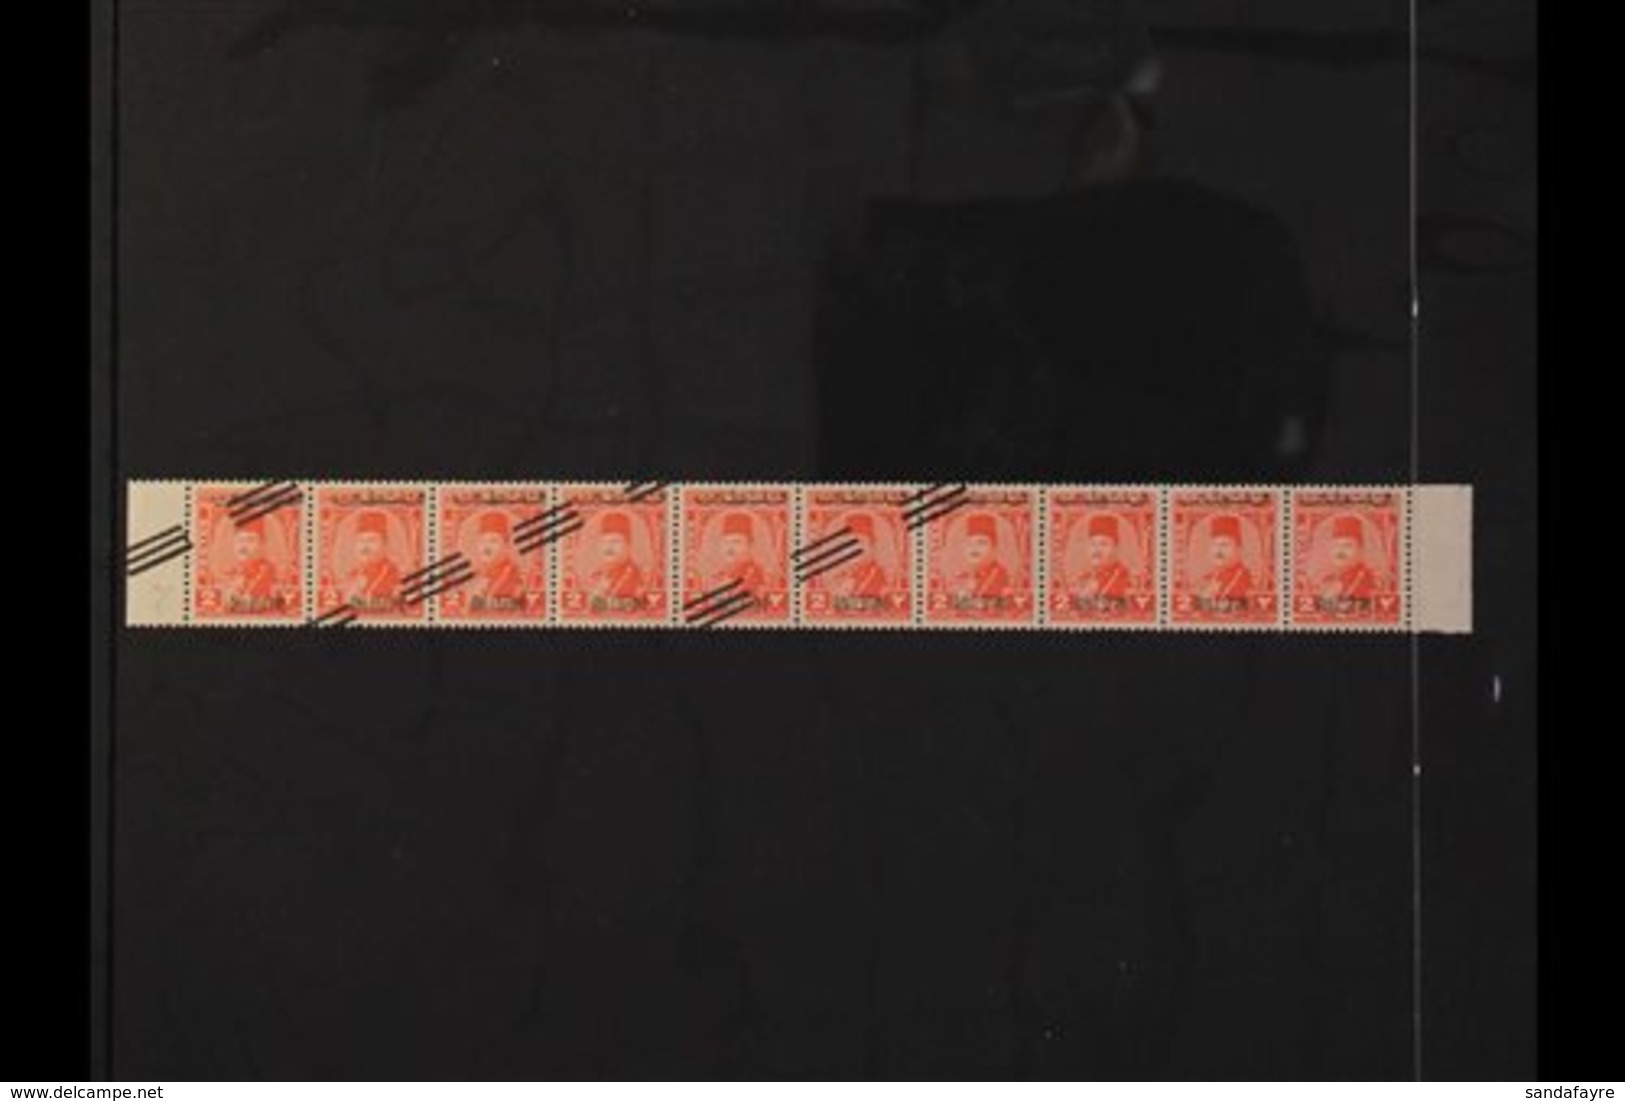 EGYPTIAN OCCUPATION 1953 2m Vermilion Bars Overprint, SG 33, Never Hinged Mint Horizontal STRIP OF 10 With Seven Stamps  - Palestine